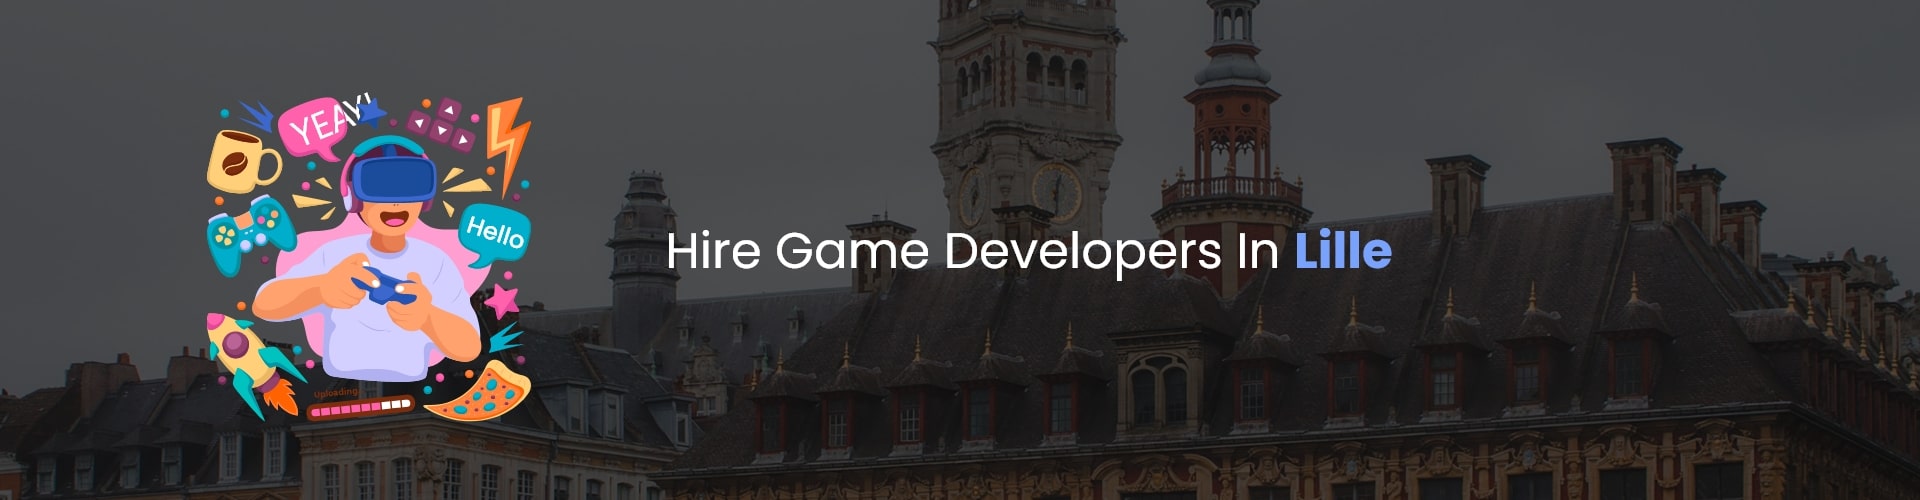 game developers lille